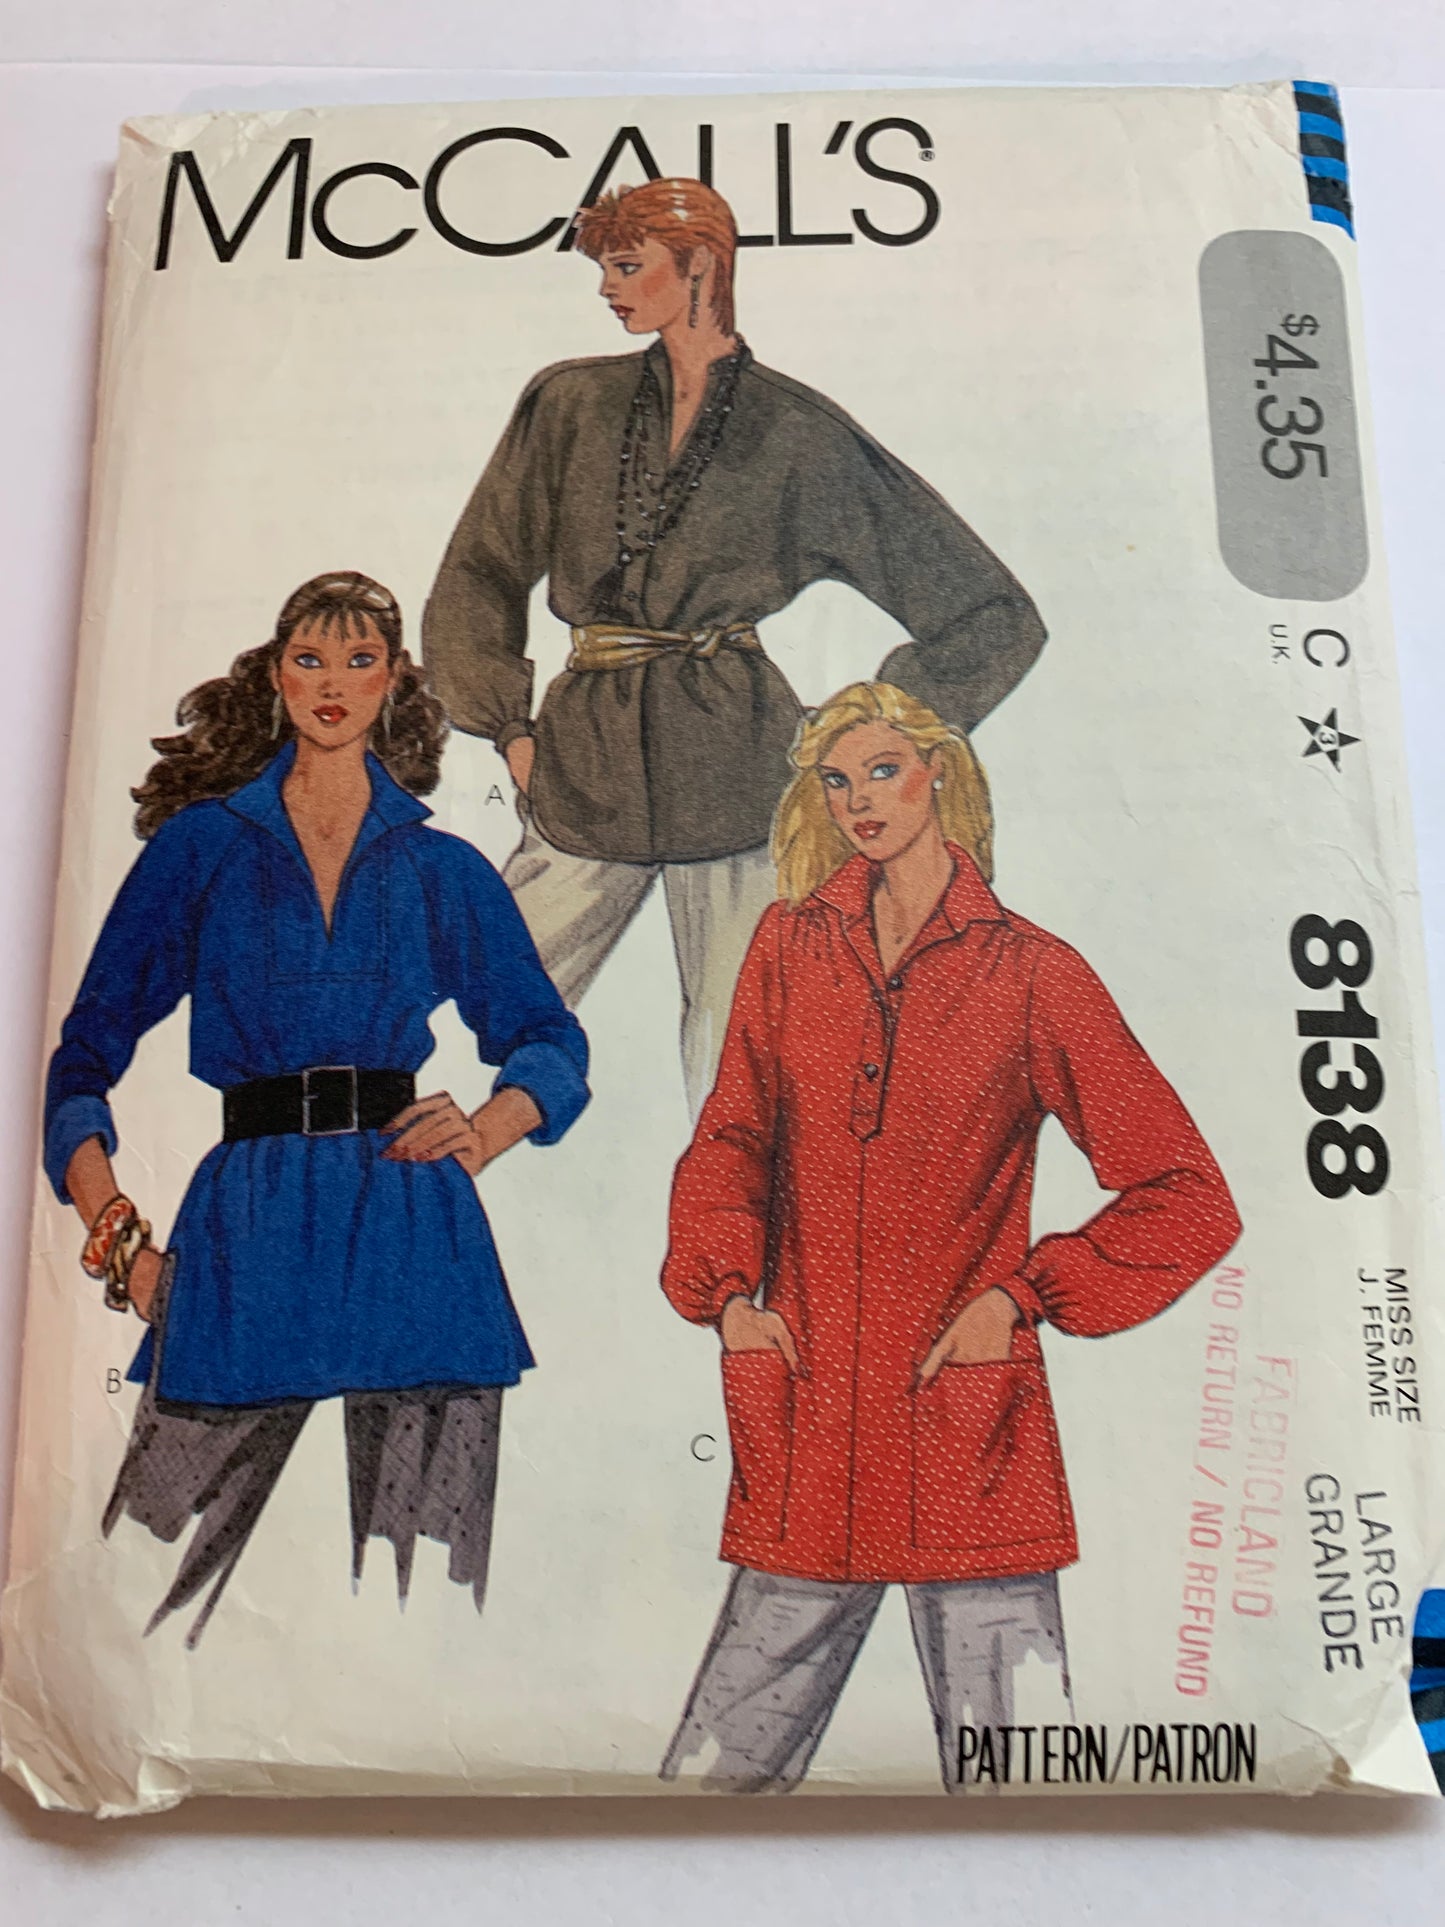 McCall's Sewing Pattern 8138 Misses' Tops, Long Sleeves, Pullover,  Loose-Fitting, Pockets, 3 Variations, Size 18-20, Uncut, Vintage 1982